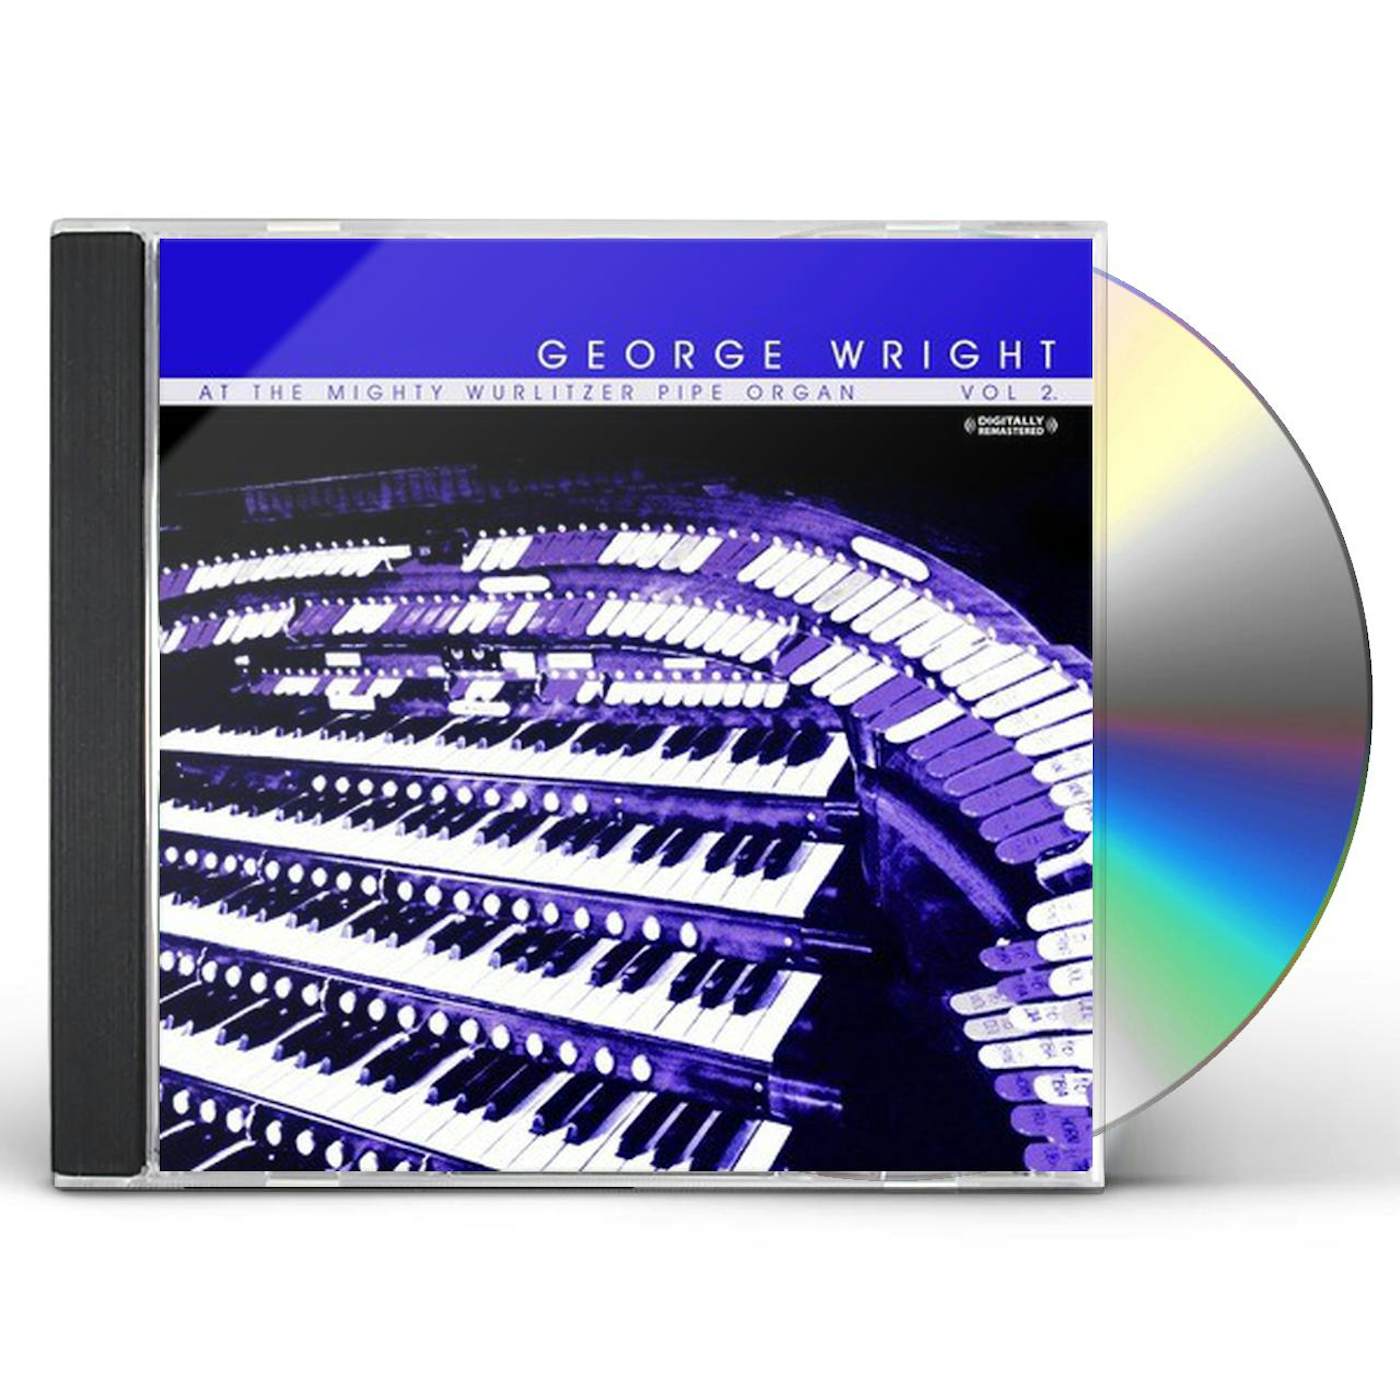 George Wright AT THE MIGHTY WURLITZER PIPE ORGAN, VOL. 2 CD